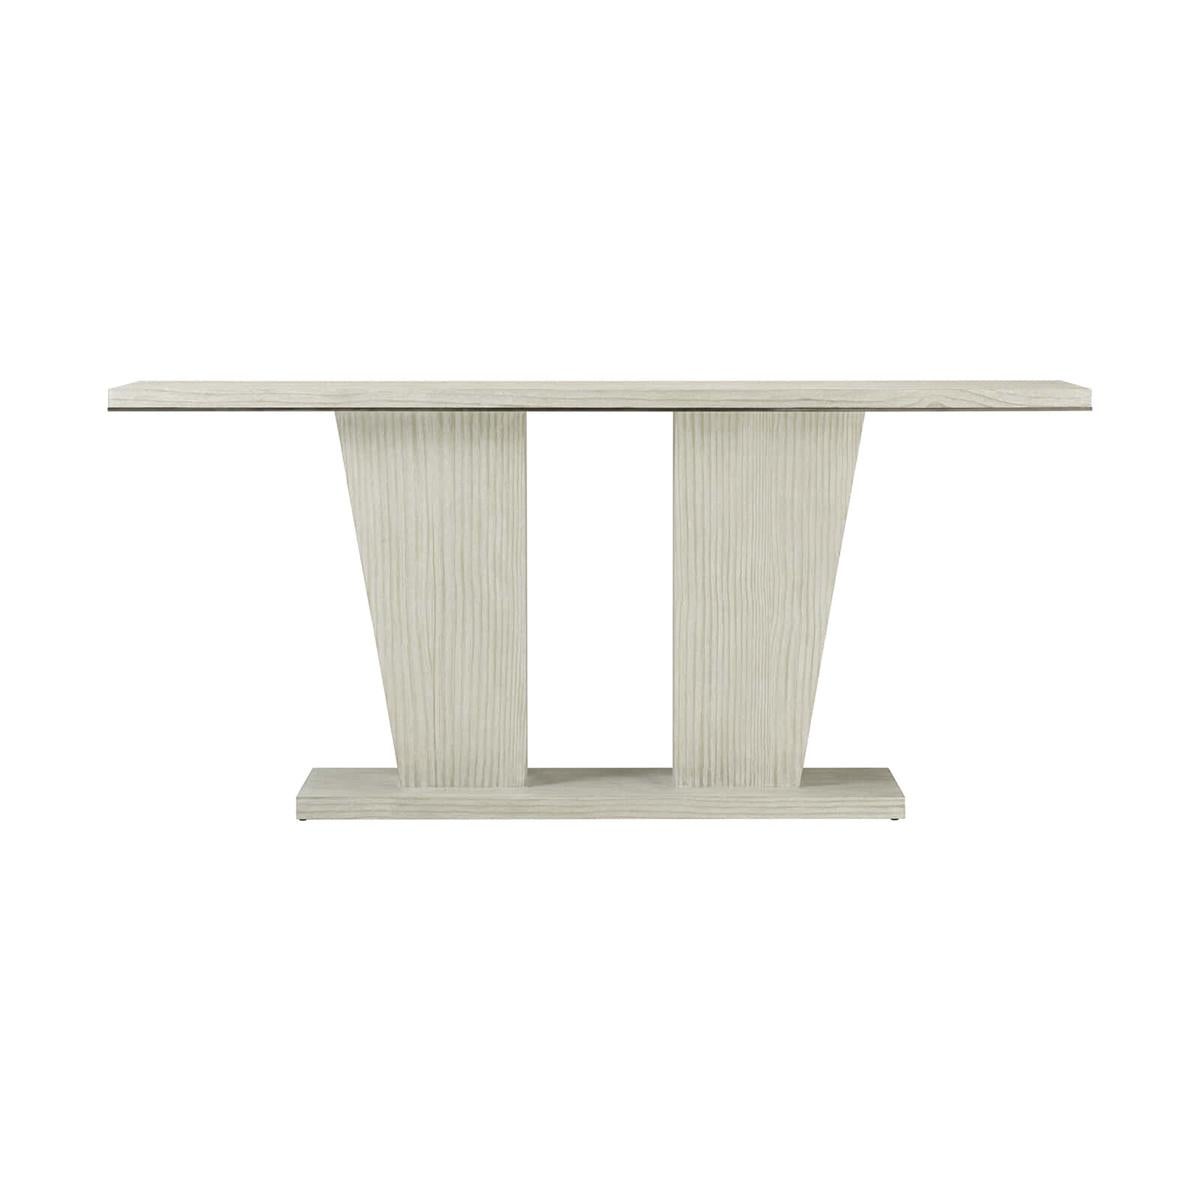 A modern coastal console table, exquisitely crafted from quartered pine highlighted by a double pedestal base and decorative tapering supports in our wire brushed cerused pine Sea Salt finish.

Dimensions: 76